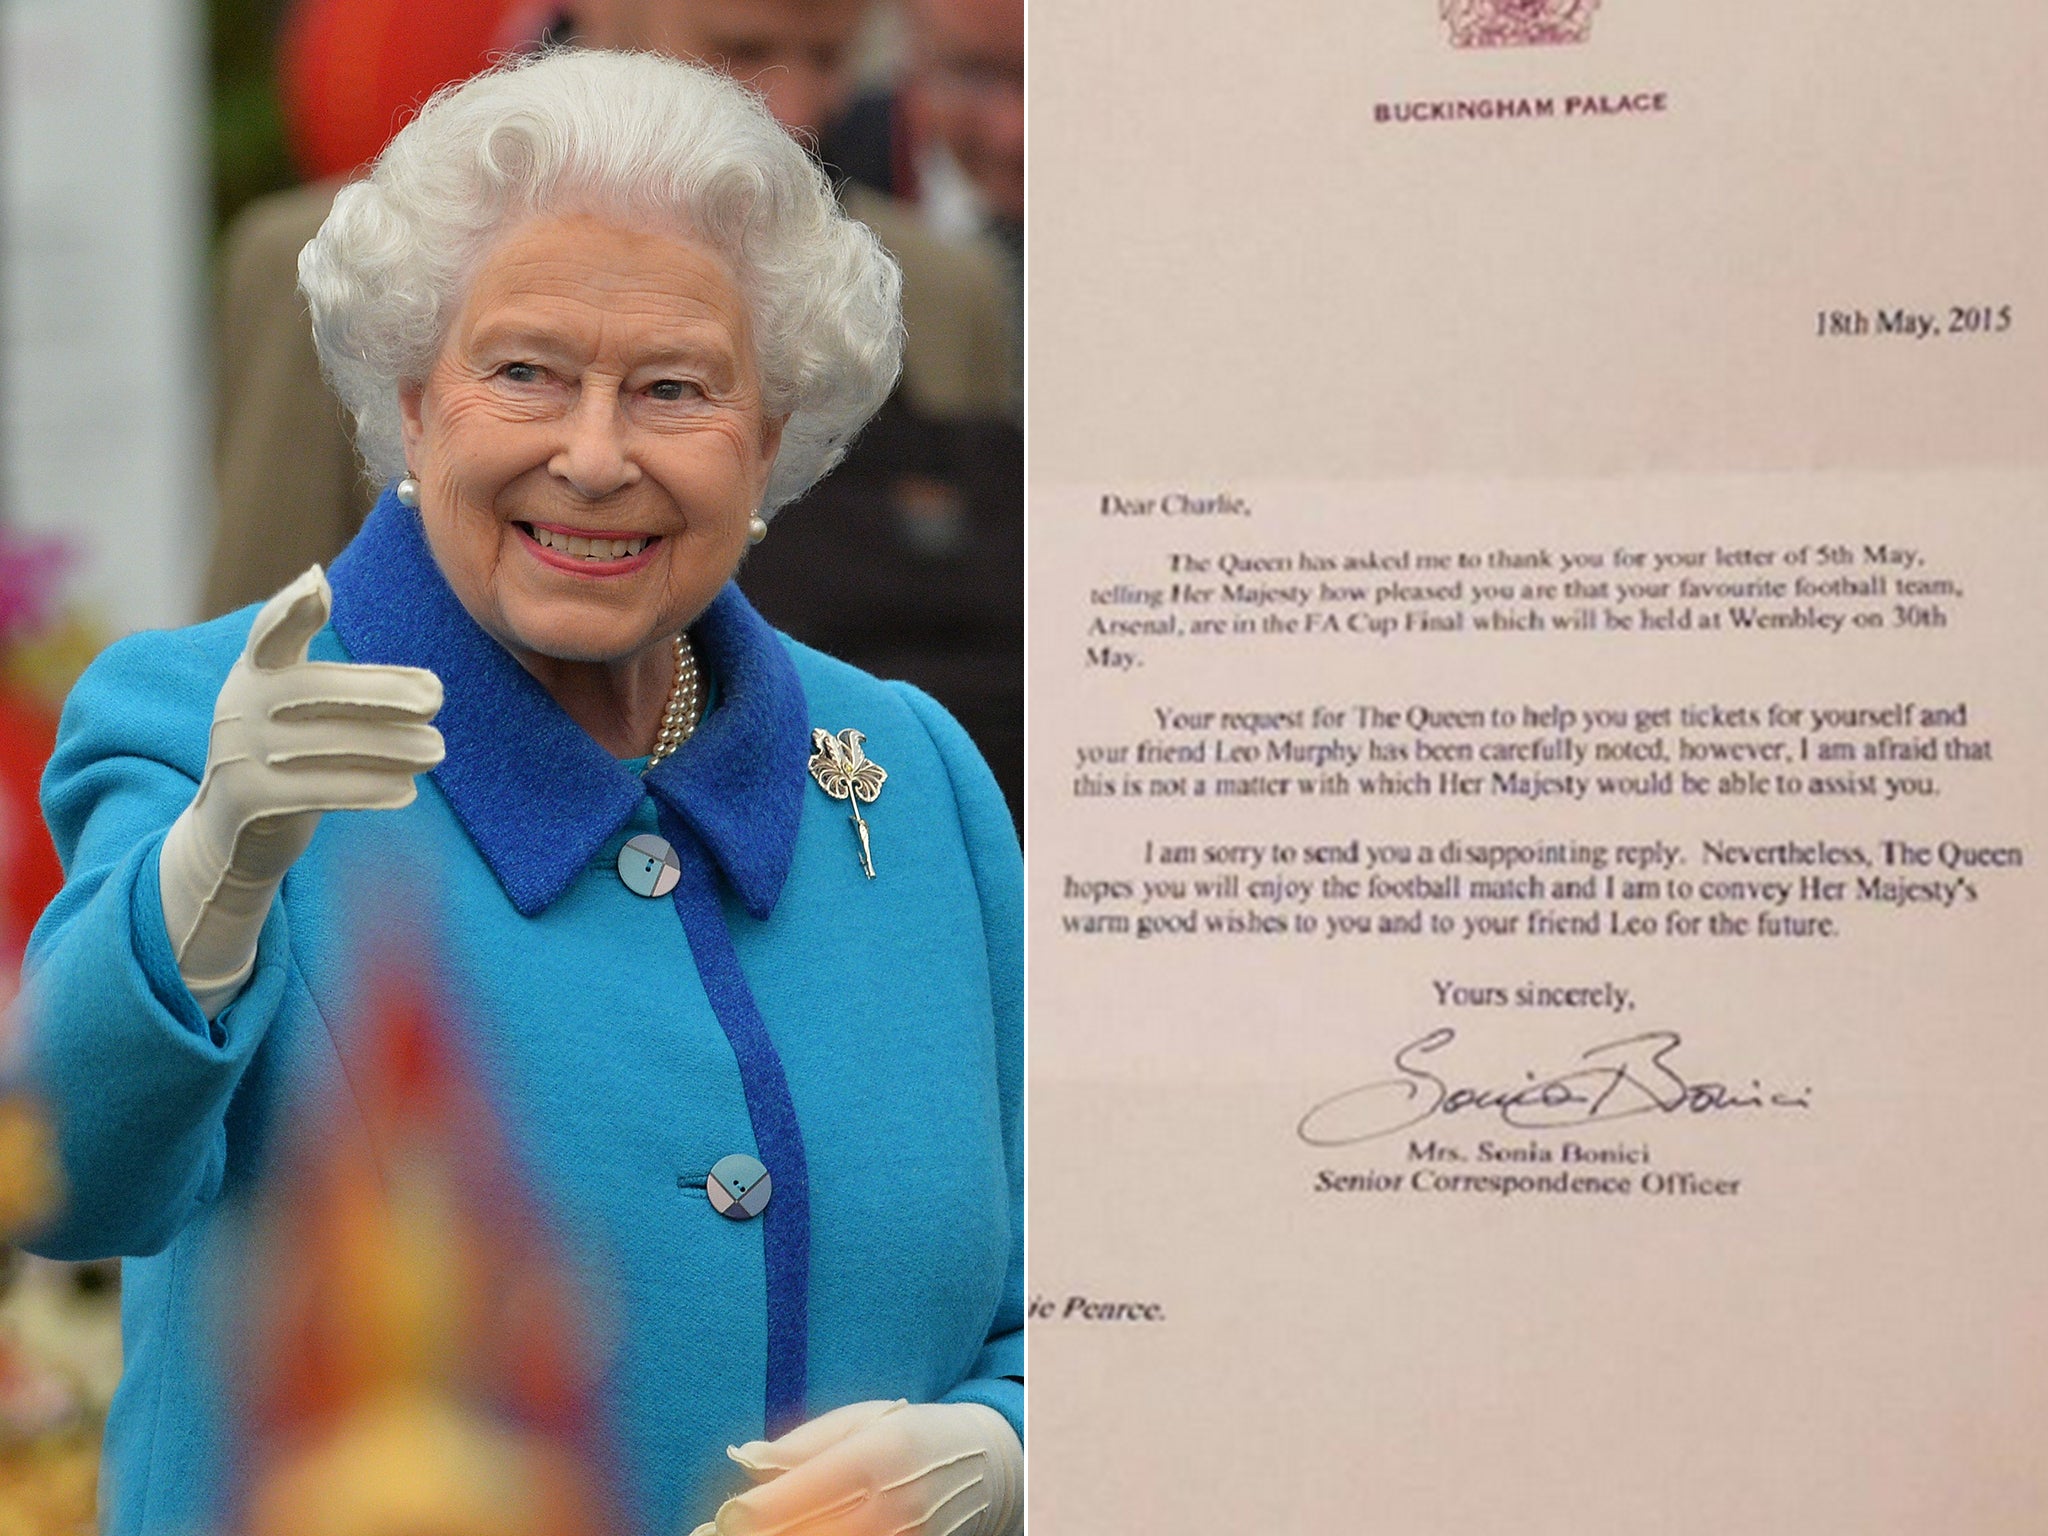 The Queen and the letter sent to Charlie